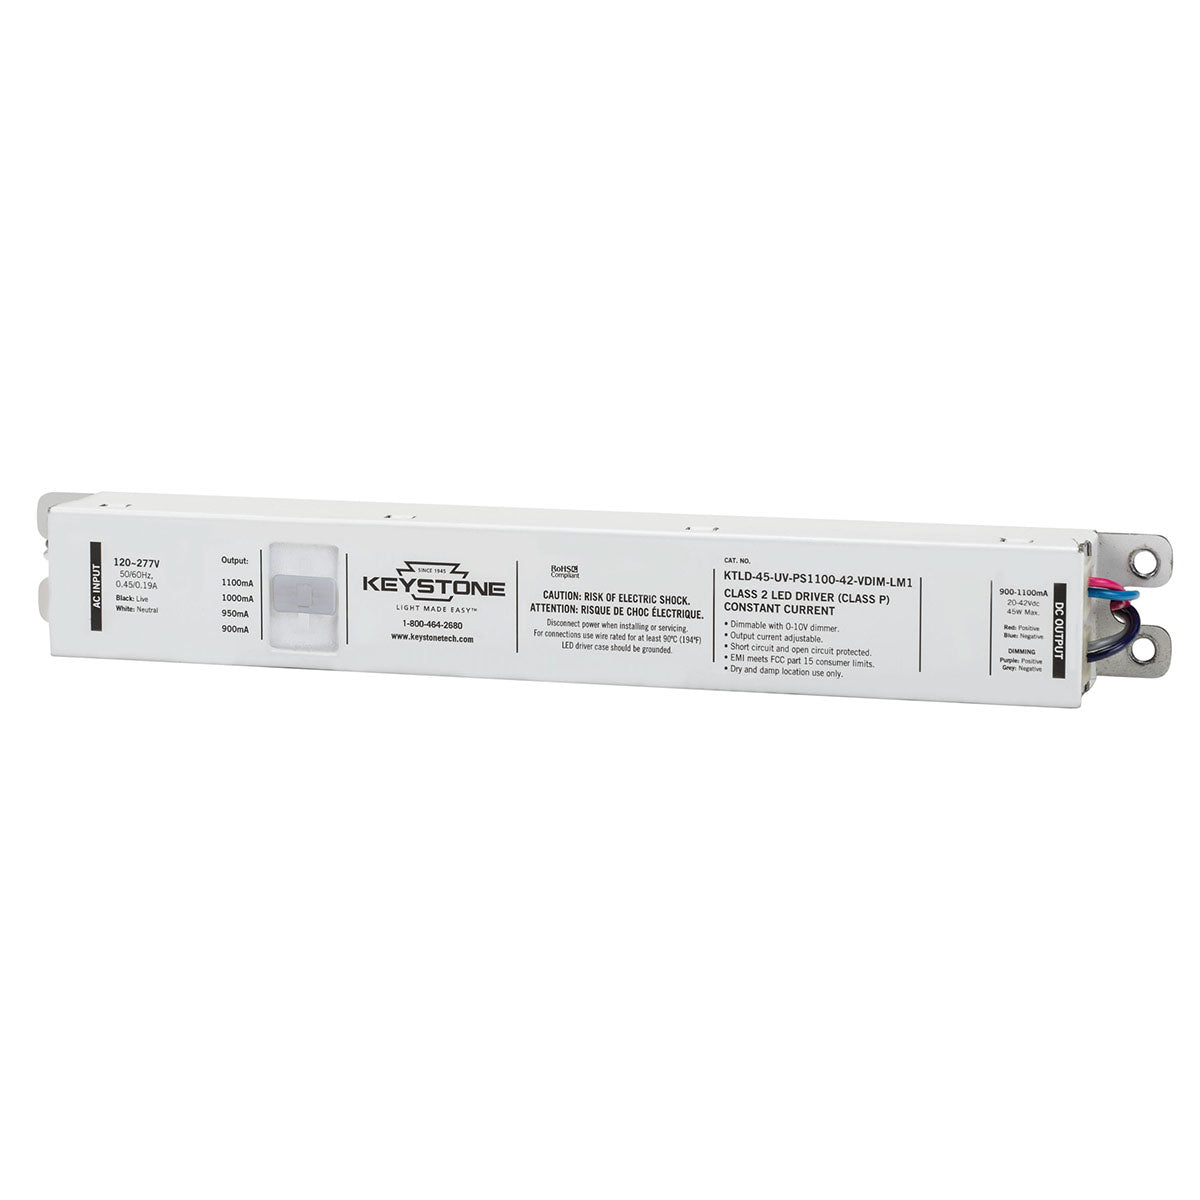 Power Select LED Driver, 45W, Adjustable Constant Current 900-1100mA, 0-10V Dimming, 120-277V Input